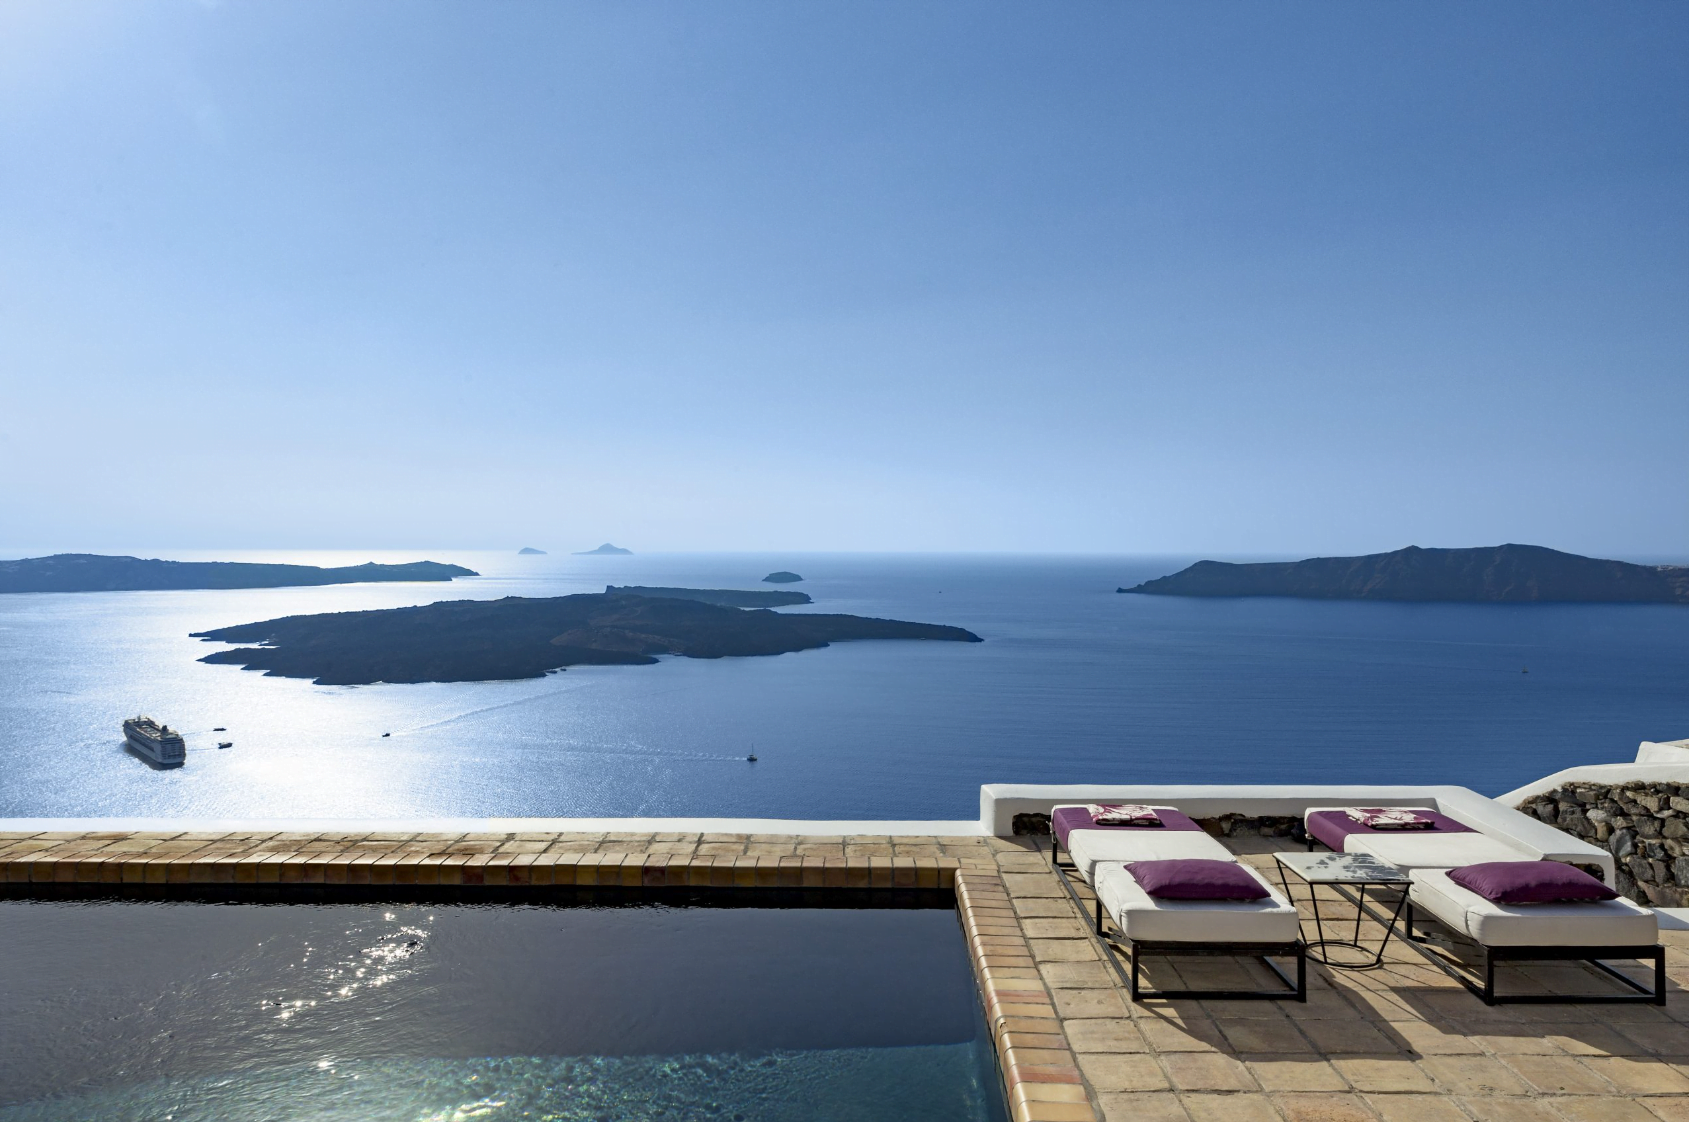 A tranquil poolside with sun loungers overlooking a panoramic view of the sea and distant islands.